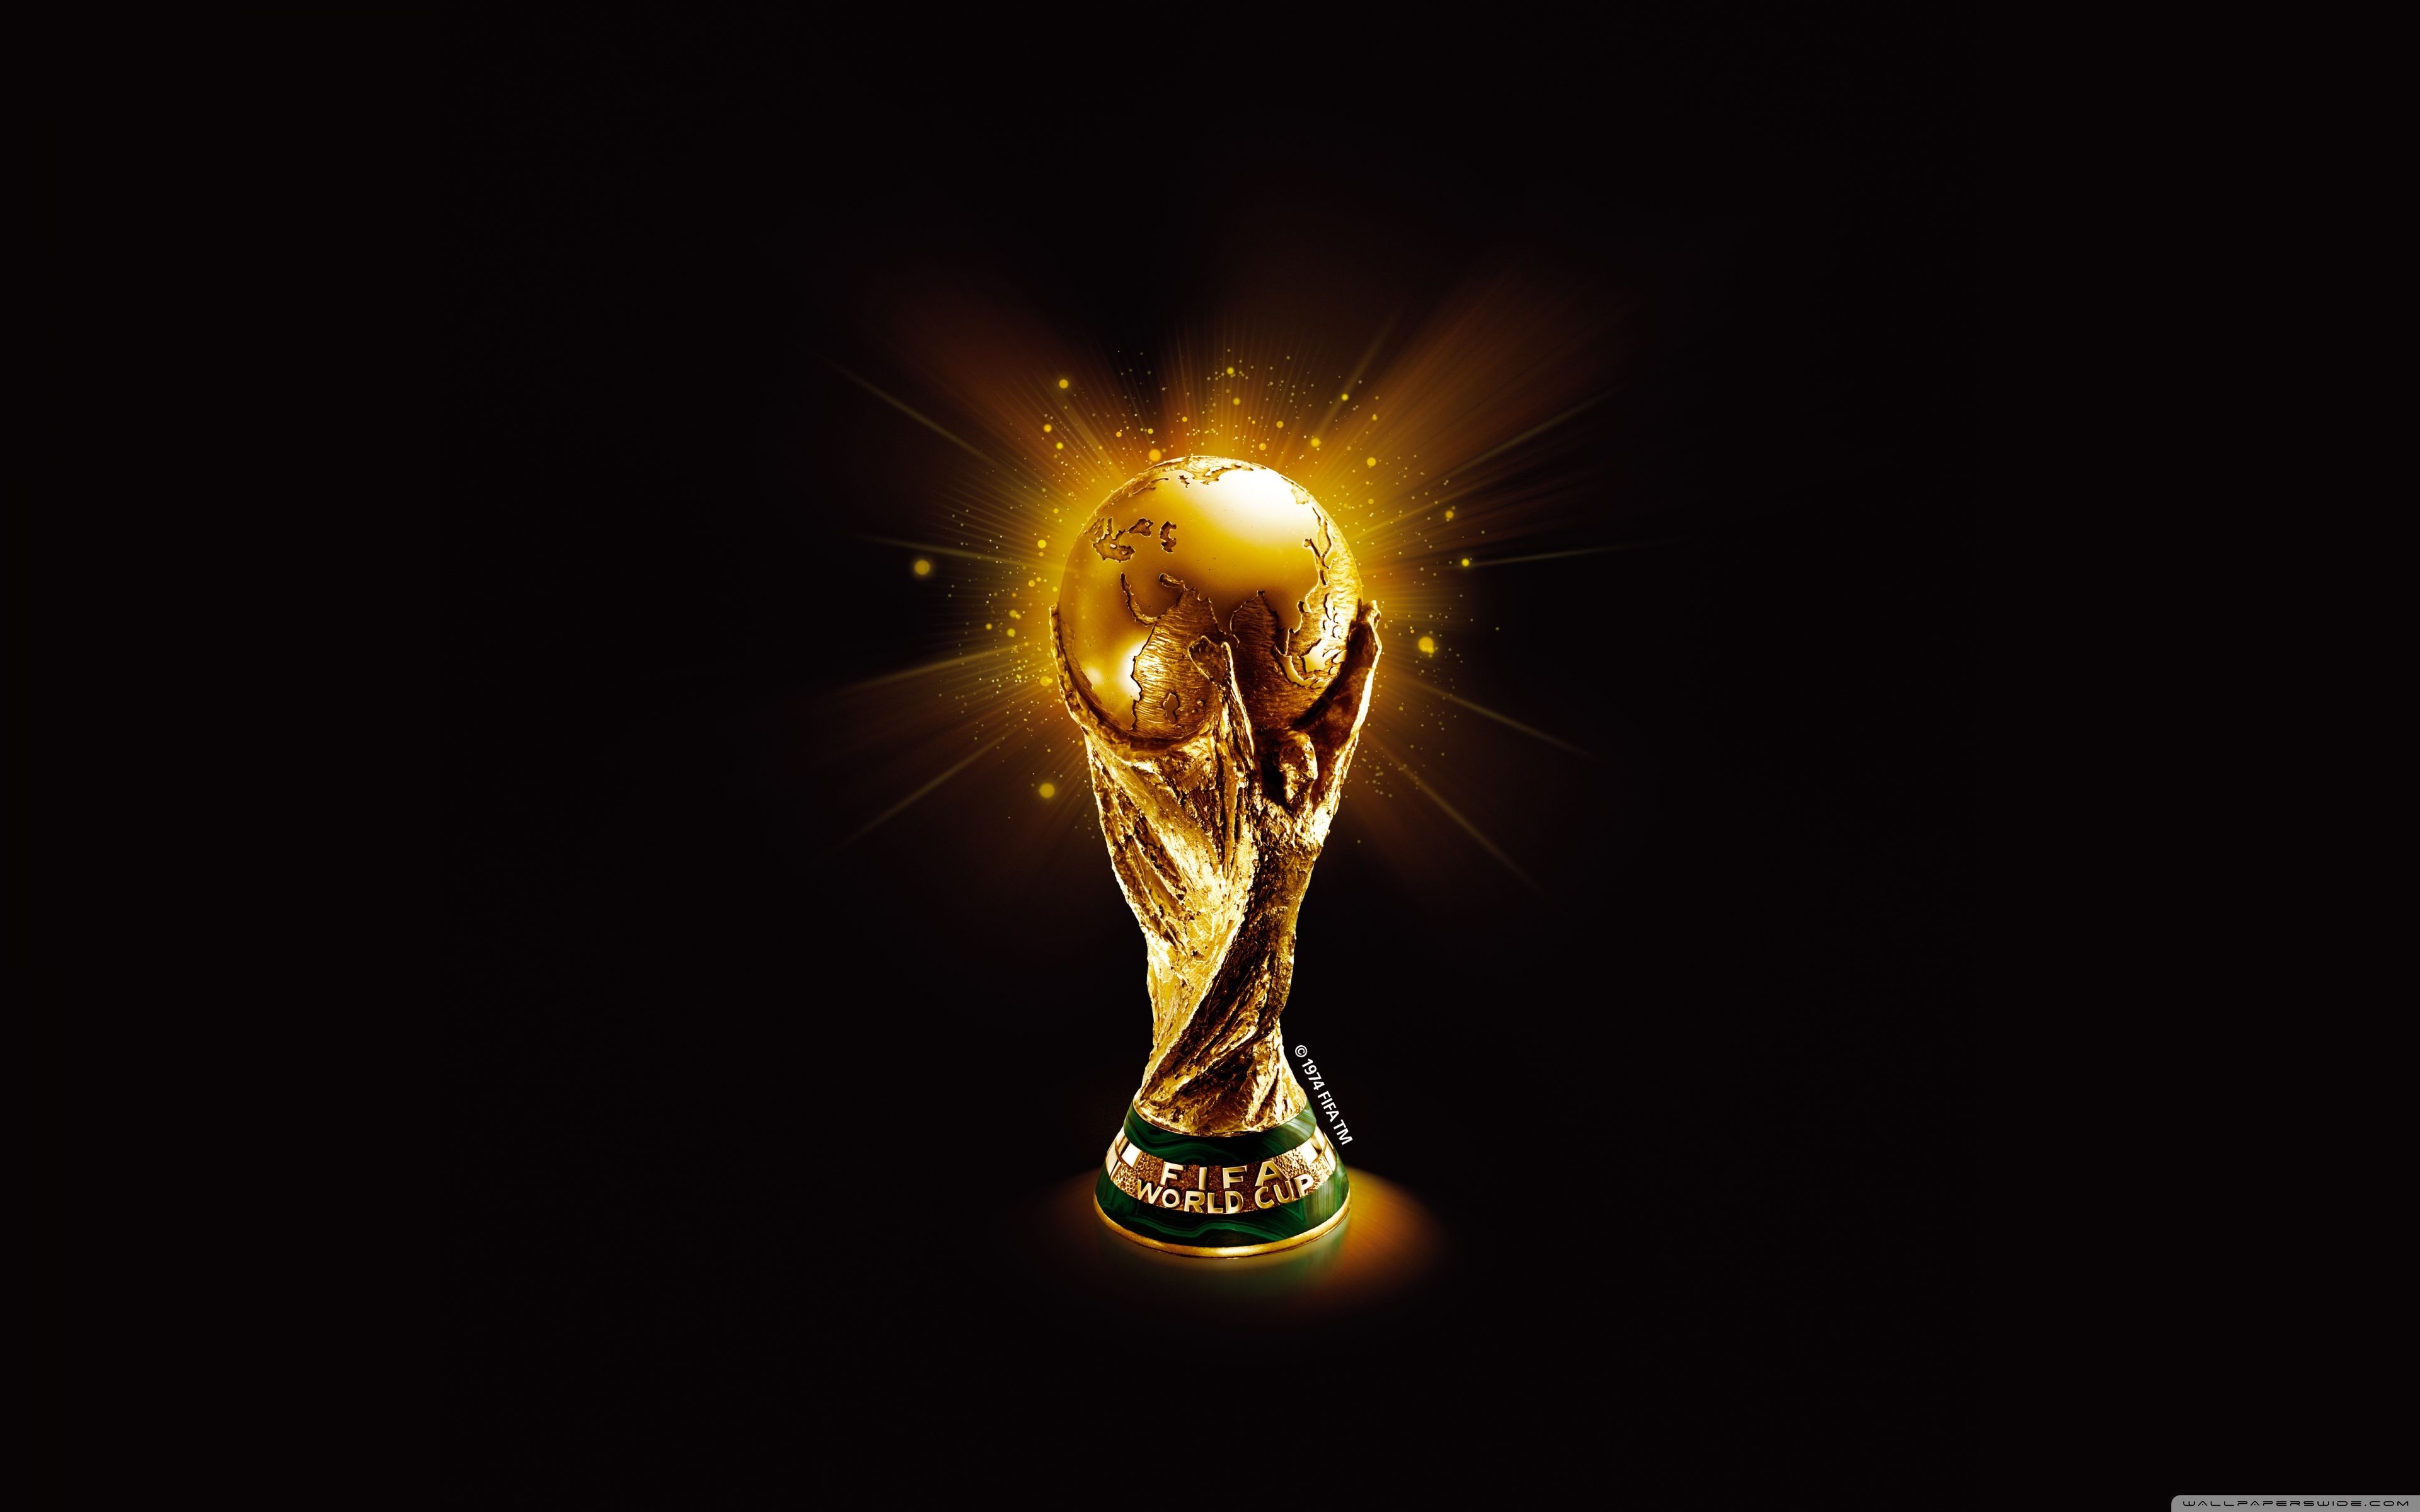 FIFA World Cup Wallpaper Free FIFA World Cup Background